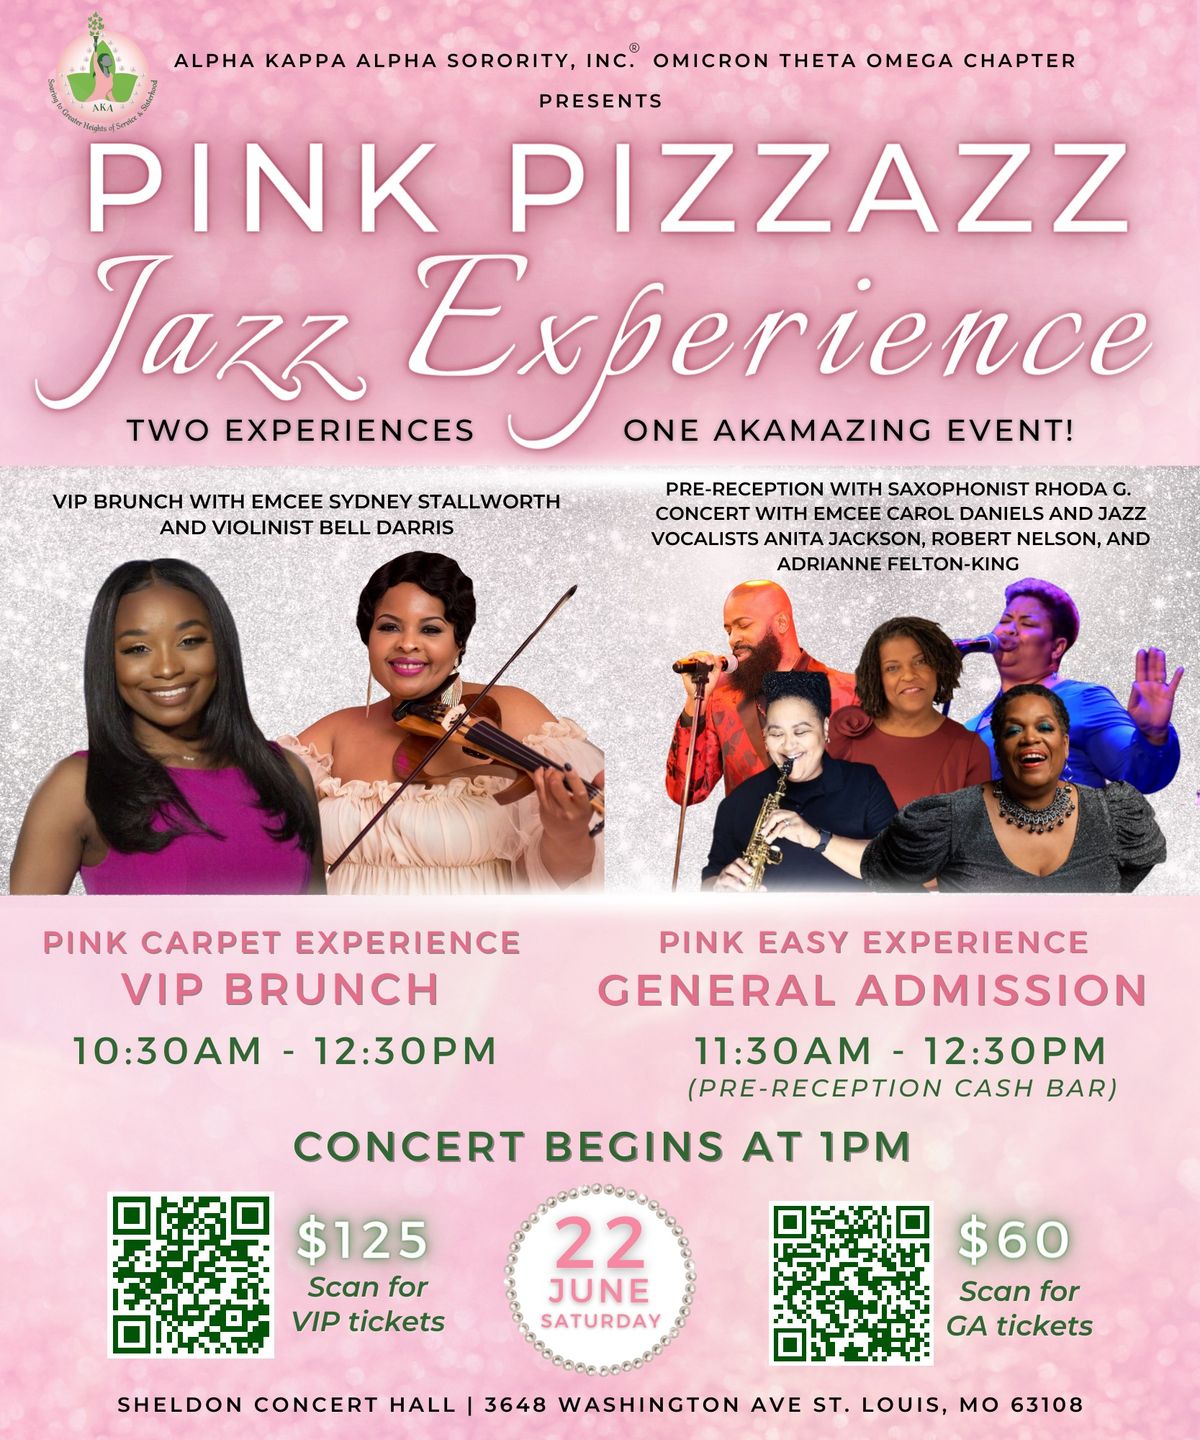 The Pink Pizzaz Jazz Experience